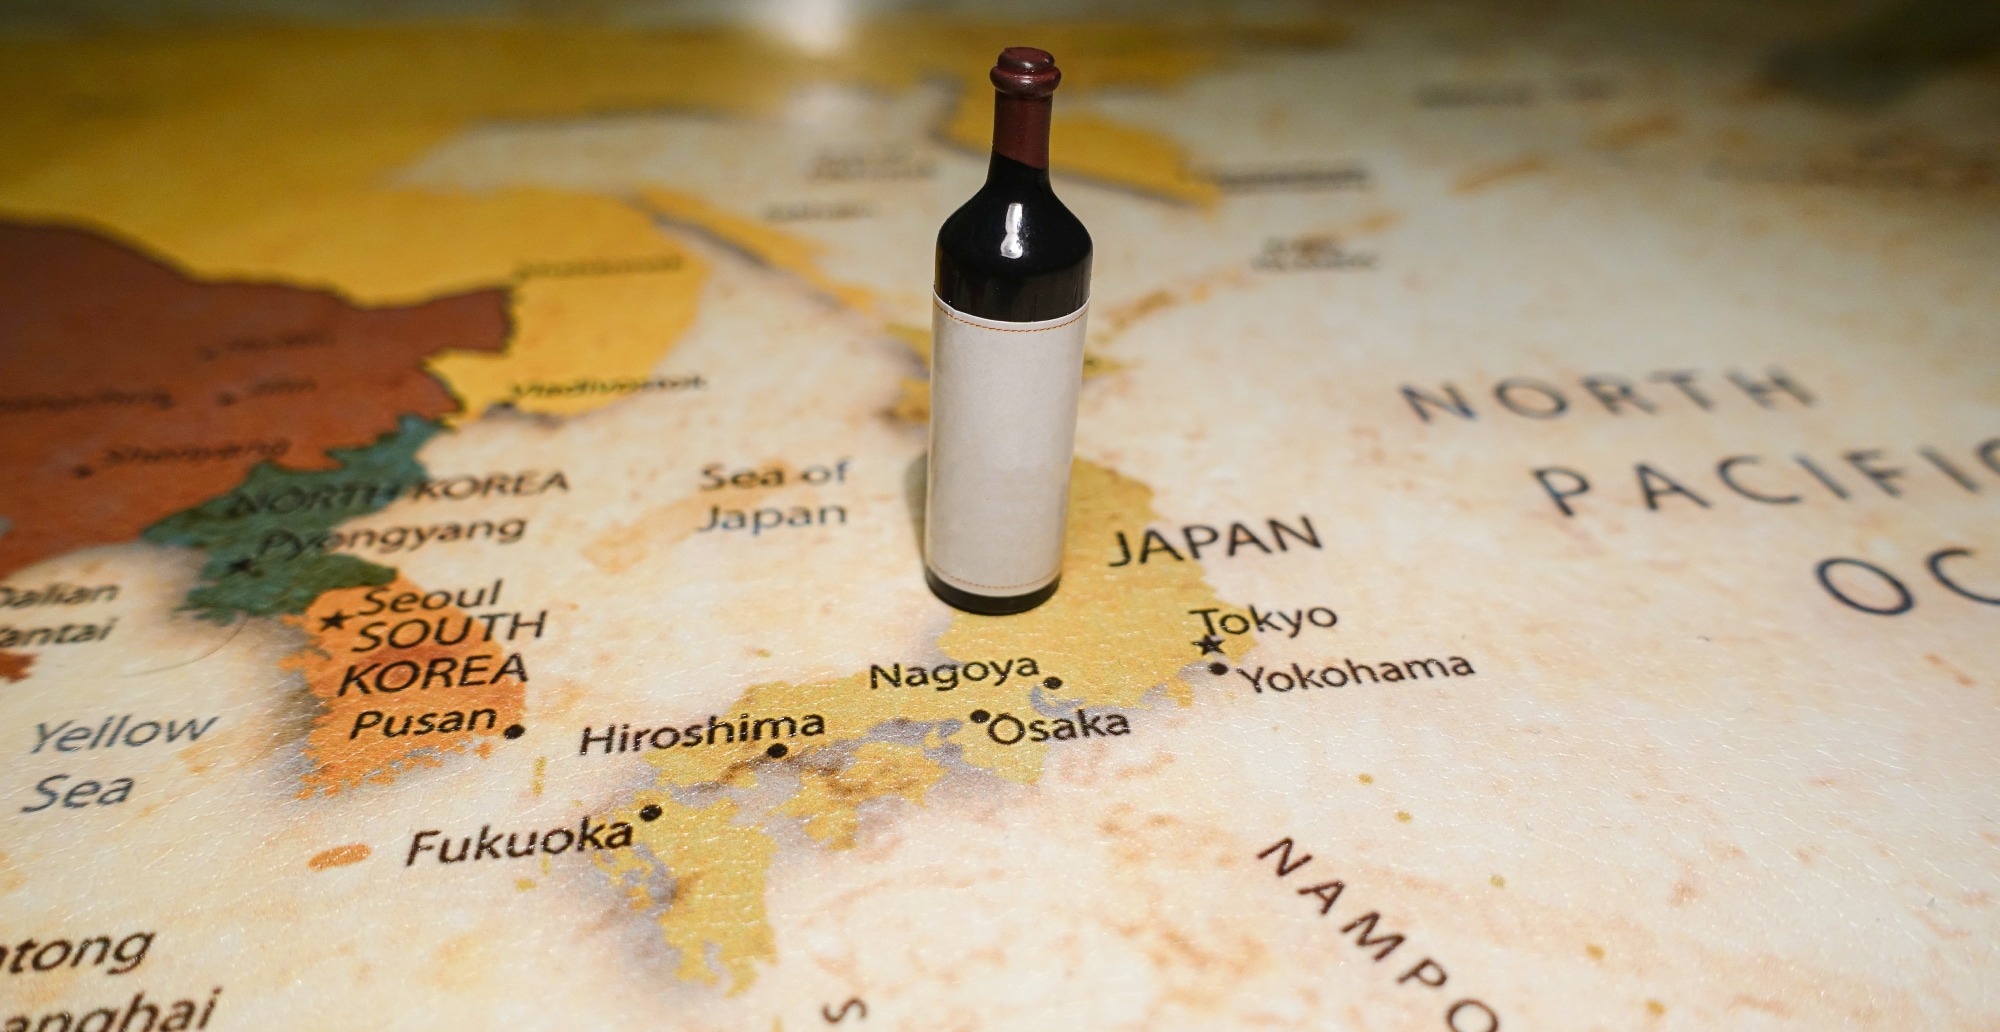 Study: The Effect of Hokkaido Red Wines on Vascular Outcomes in Healthy Adult Men: A Pilot Study. Image Credit: futuristman / Shutterstock